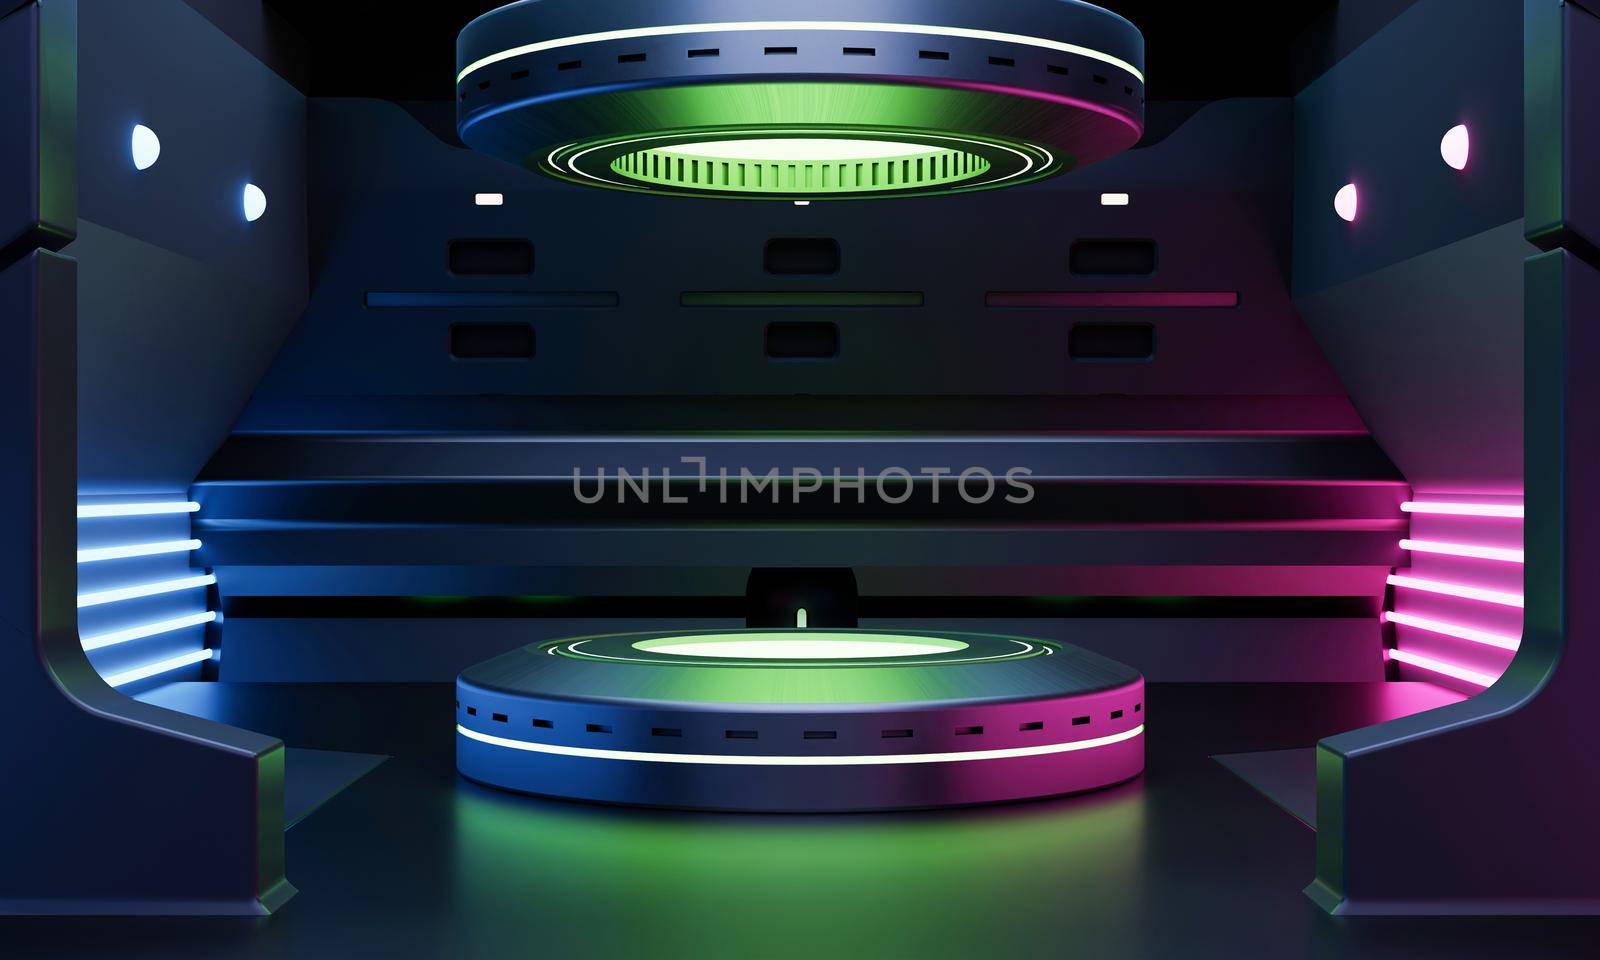 Cyberpunk sci-fi product podium showcase in spaceship with green blue and pink neon lighting background. Technology and object concept. 3D illustration rendering